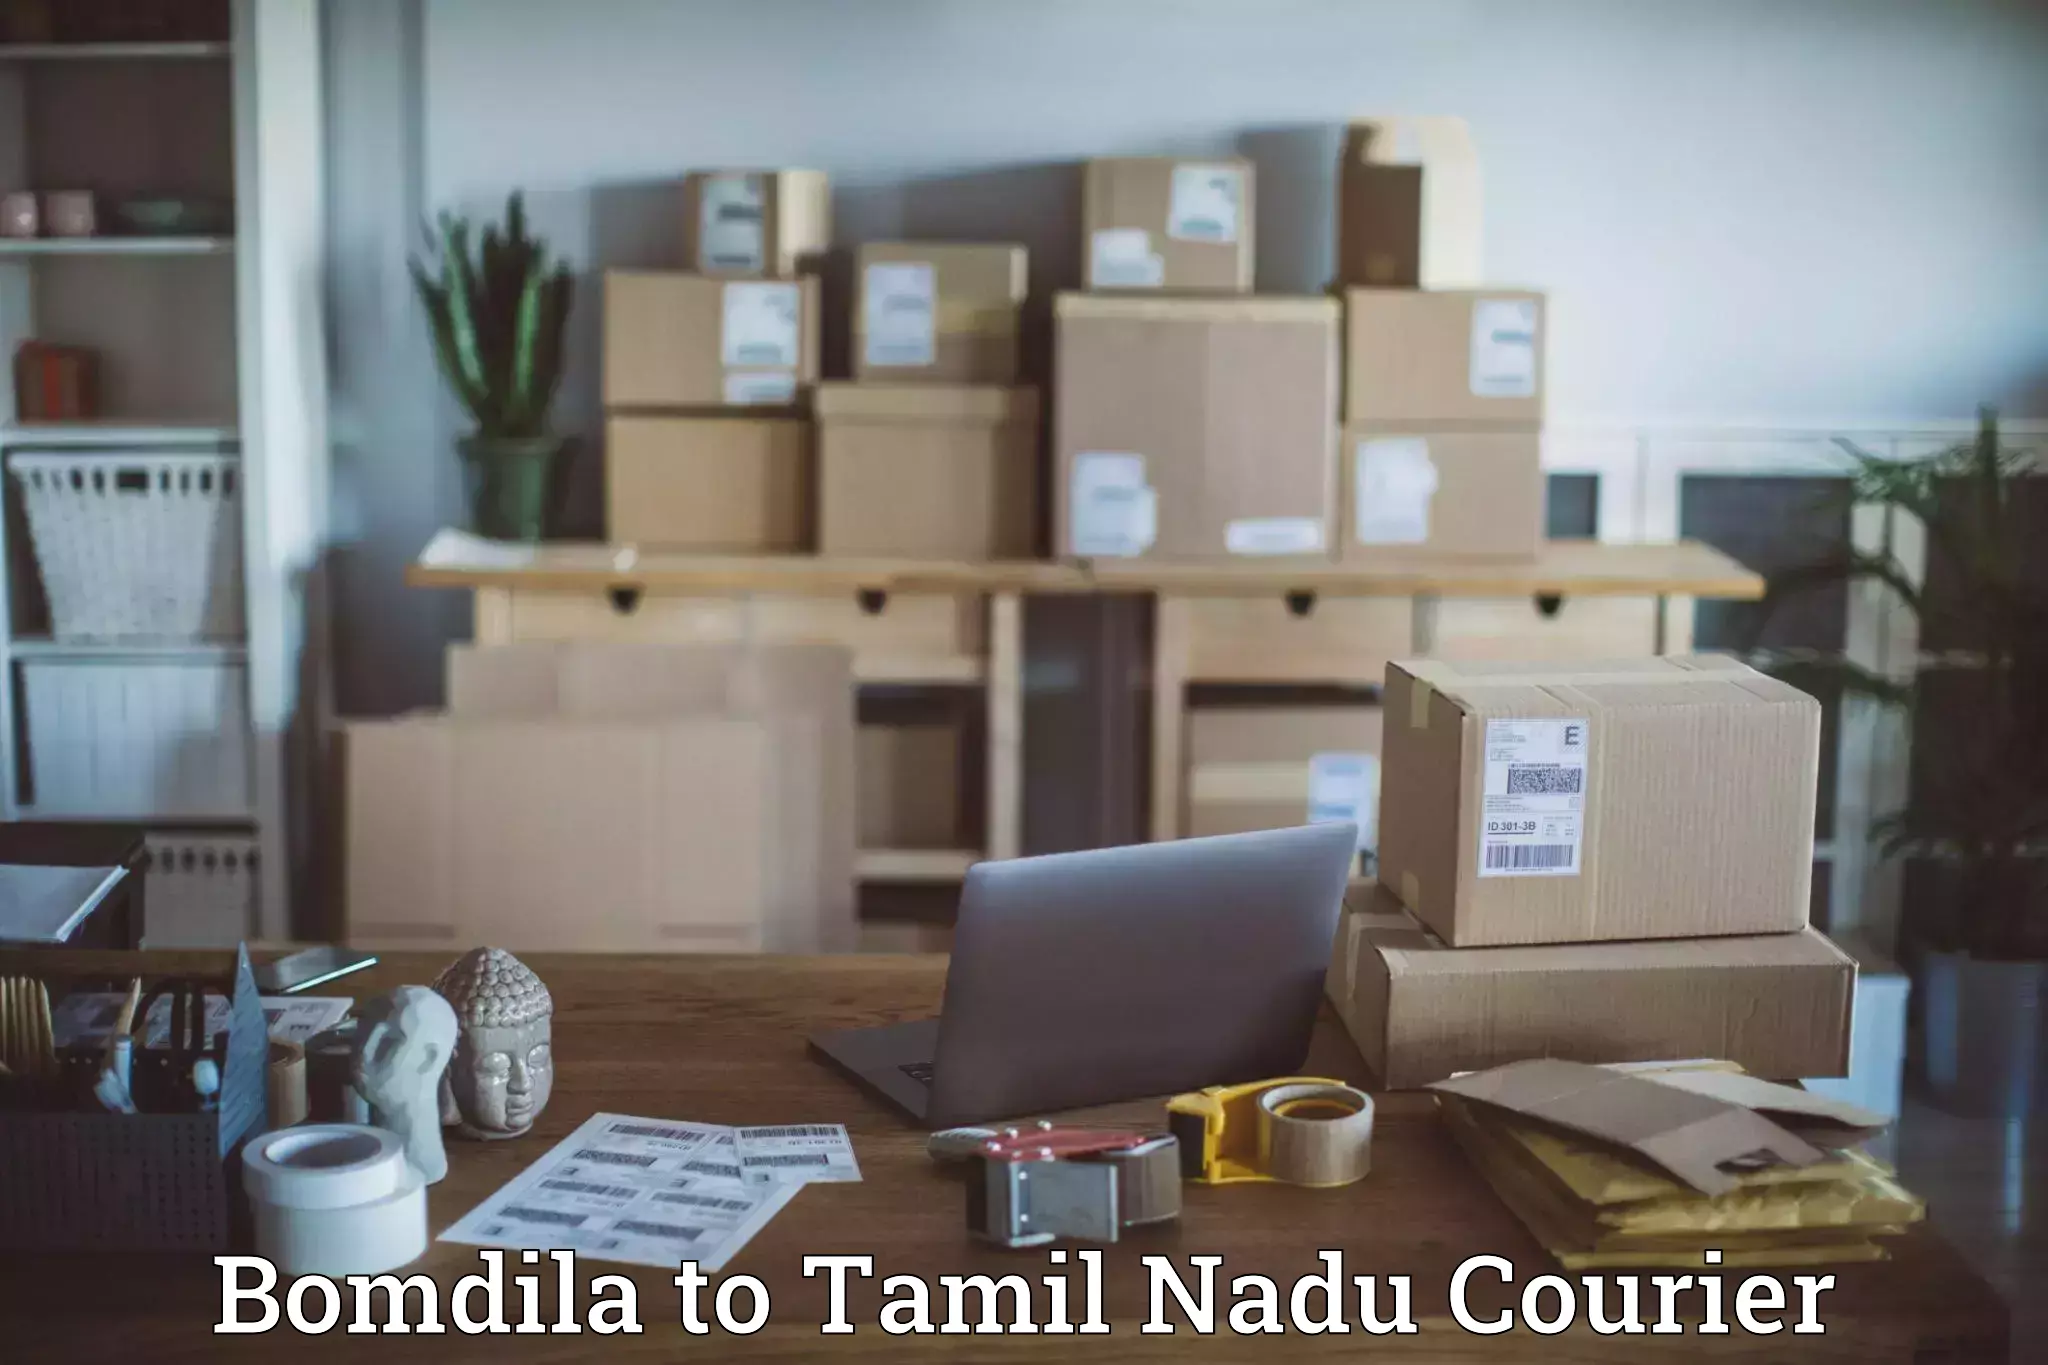 Express courier facilities Bomdila to SRM Institute of Science and Technology Chennai